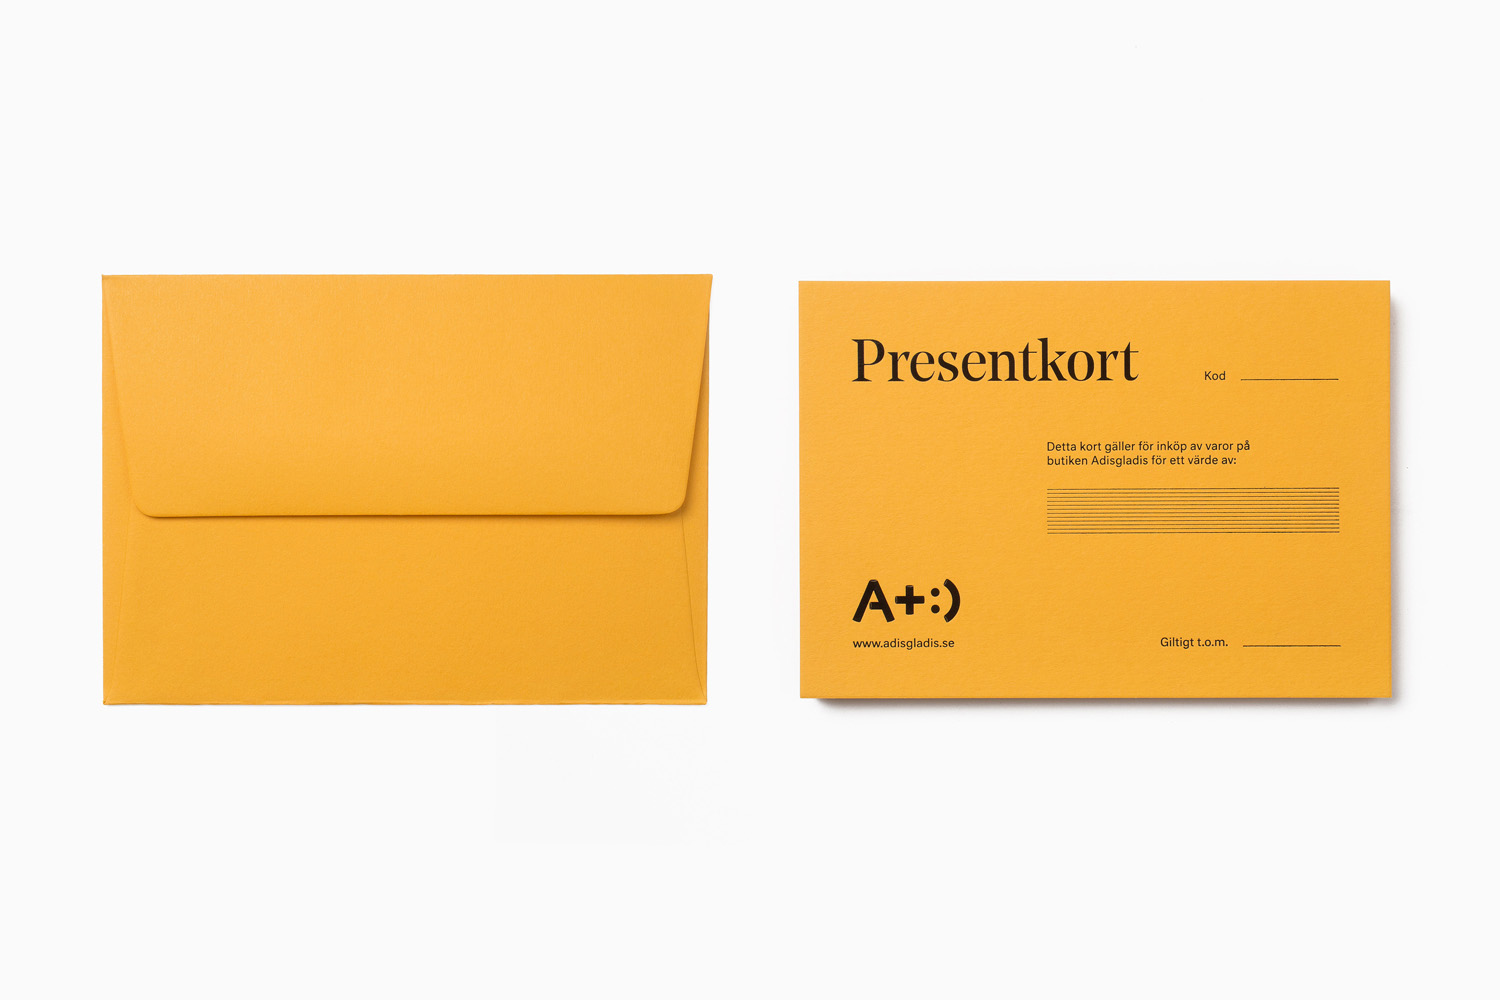 Black block foiled stationery designed by Bedow for Swedish clothing and gadget retailer Adisgladis